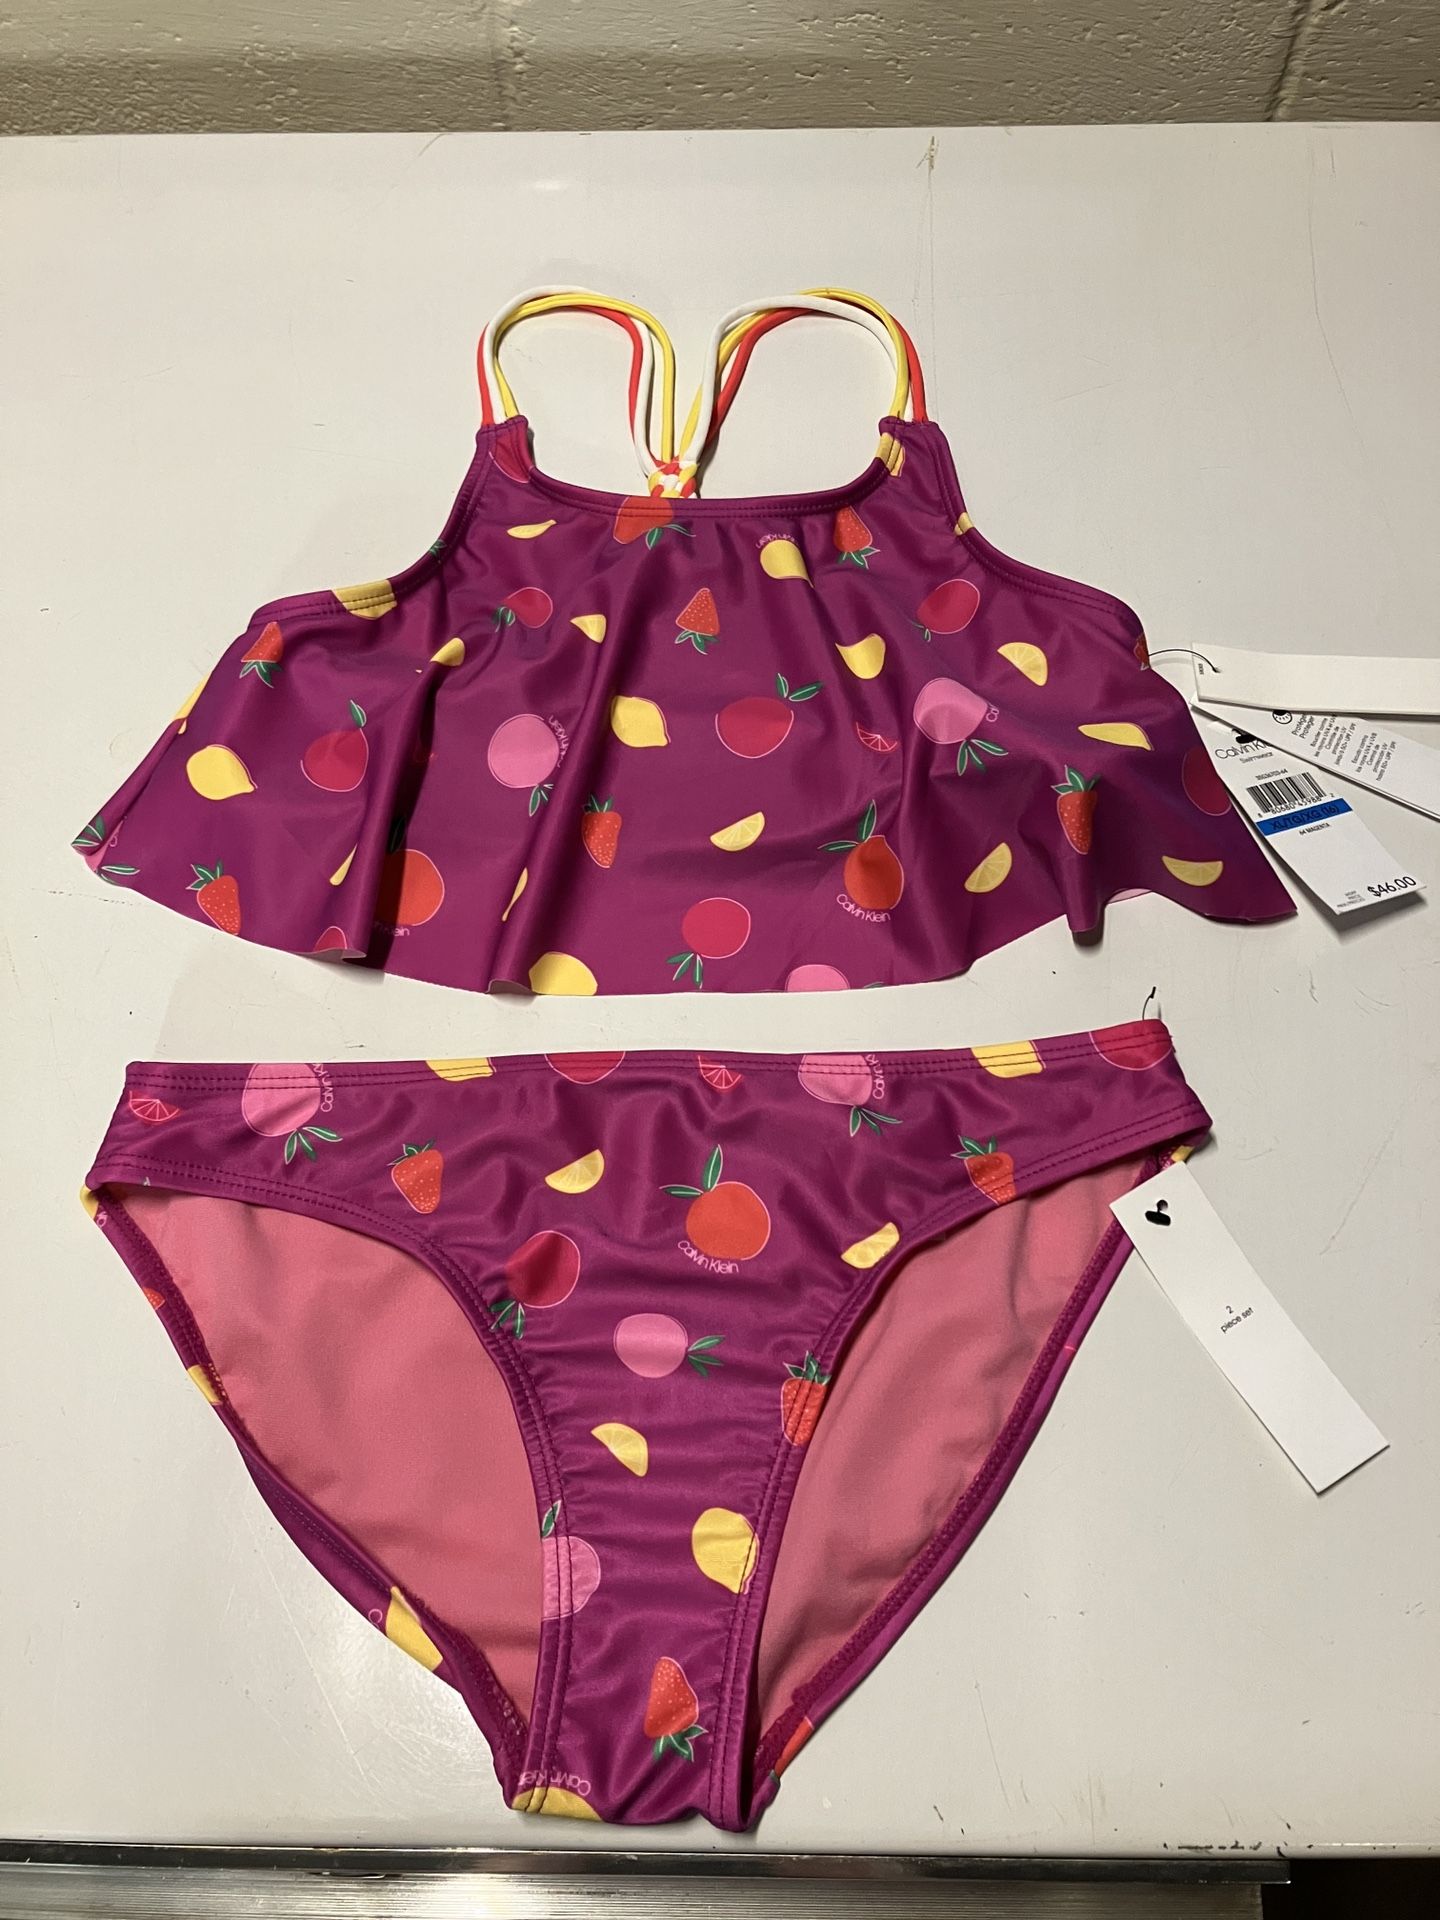 New Youth Girl Size 16 Calvin Klein 2 pc Swim Bathing Suits and Pool Straw Hat